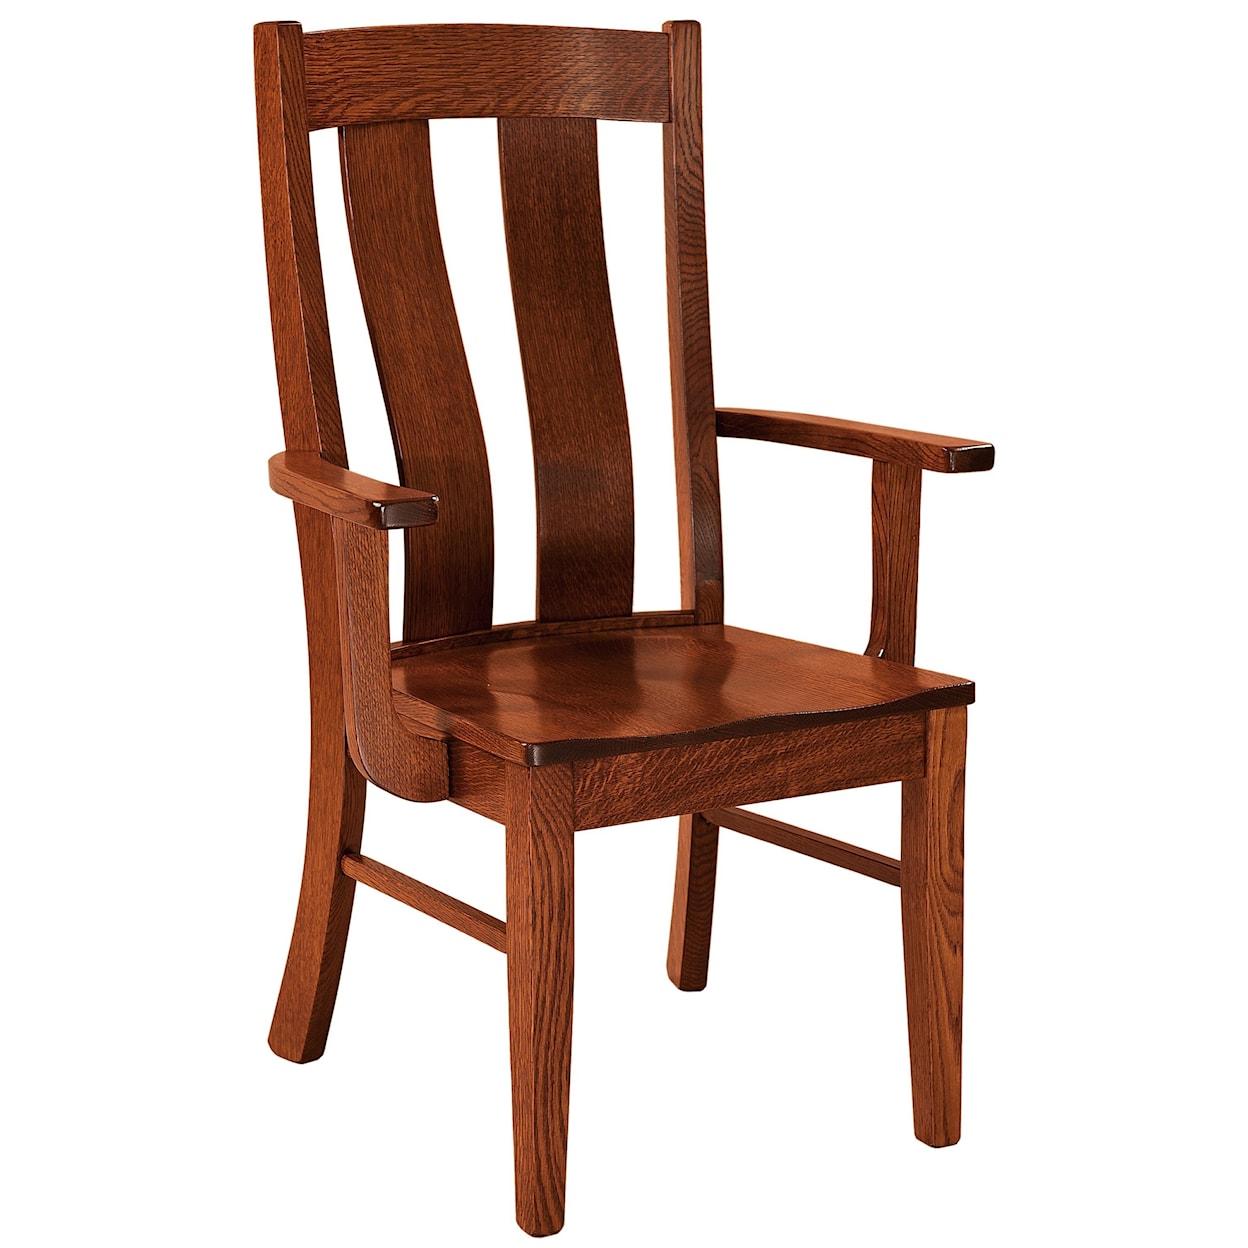 F&N Woodworking Laurie Arm Chair - Wood Seat